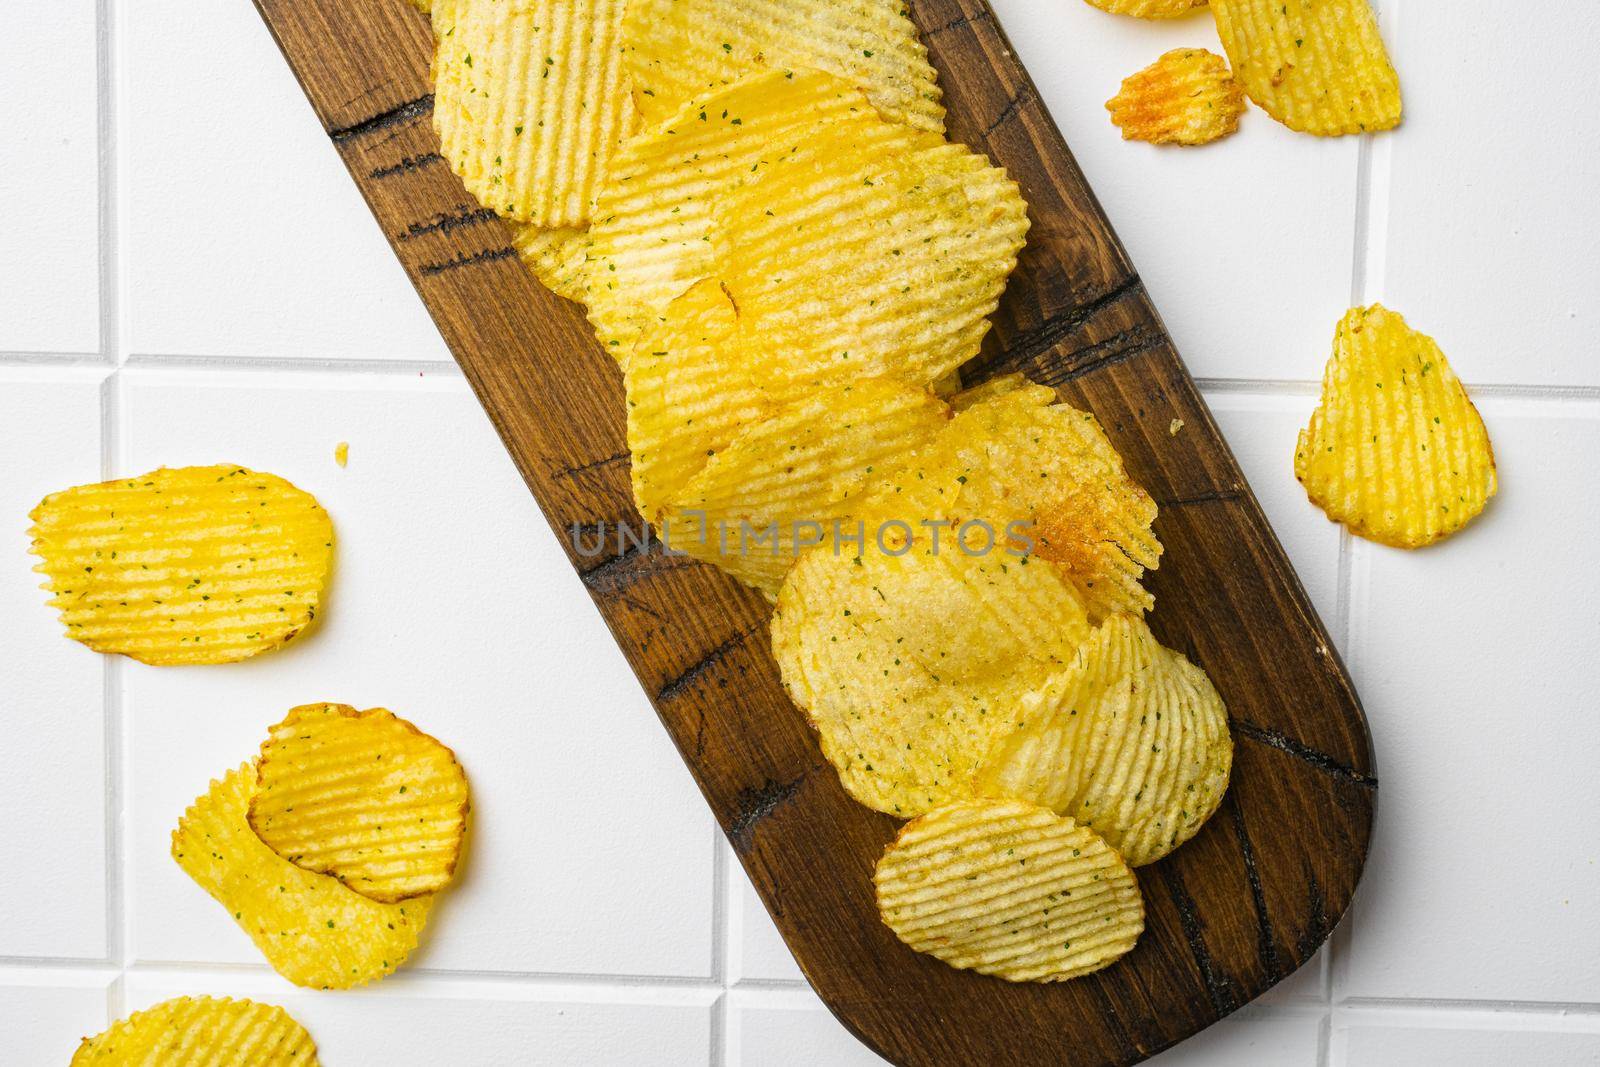 Golden corrugated potato chips on white ceramic squared tile table background, top view flat lay by Ilianesolenyi